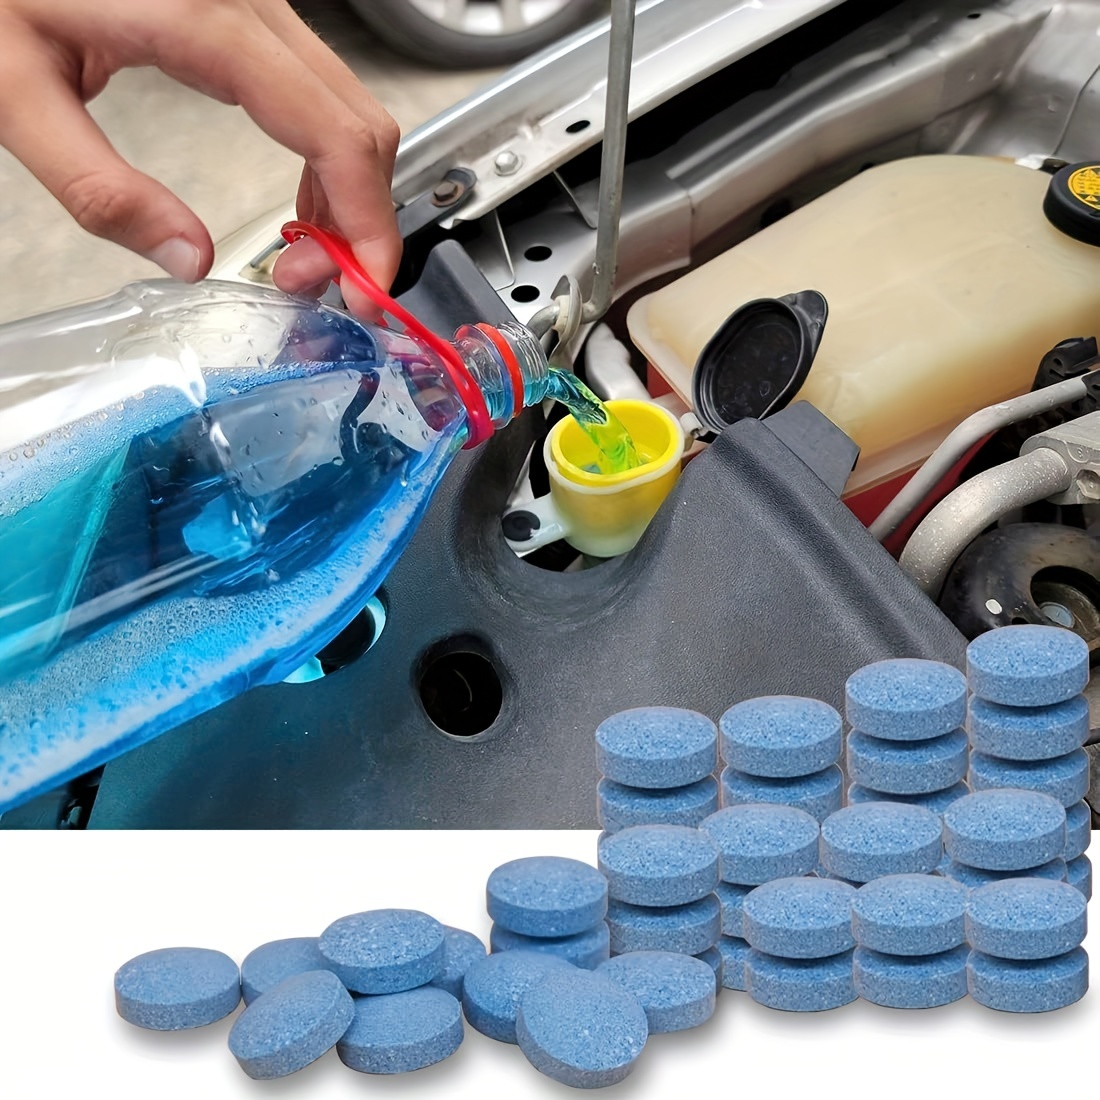 OBOSOE 100Pcs Windshield Washer Fluid Tablets,Wiper Fluid Concentrate,Washer  Cleaning Tool for Car Kitchen Window, 1 Piece Makes 1.05 Gallons,100 Pcs  Makes 105 Gallons(Winter: Use With Antifreeze) 